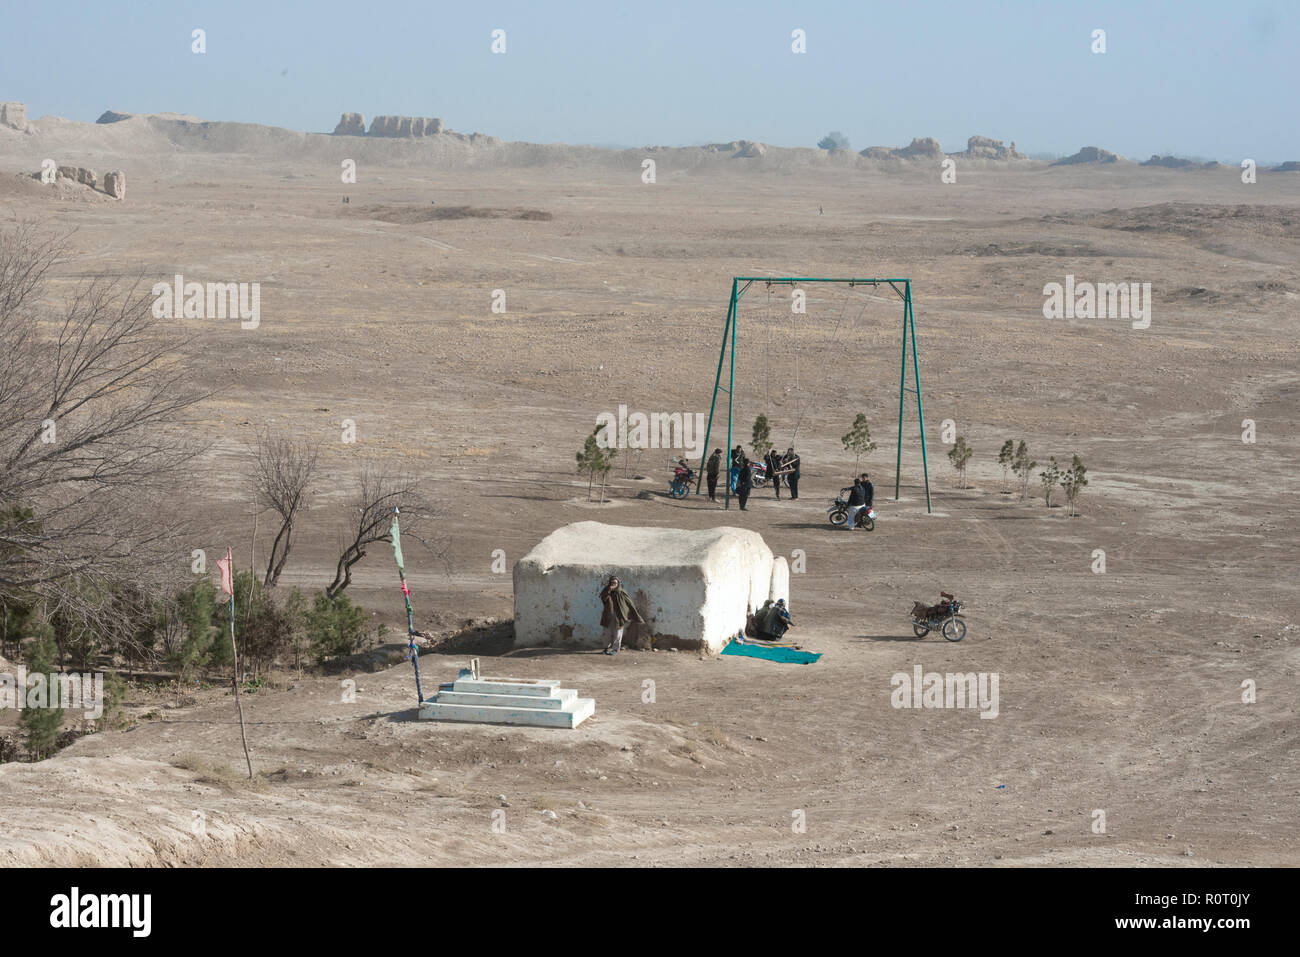 Smoking Den With A Swing Nearby In The Middle Of A Desert Landscape, Old Balkh City, Afghanistan Stock Photo